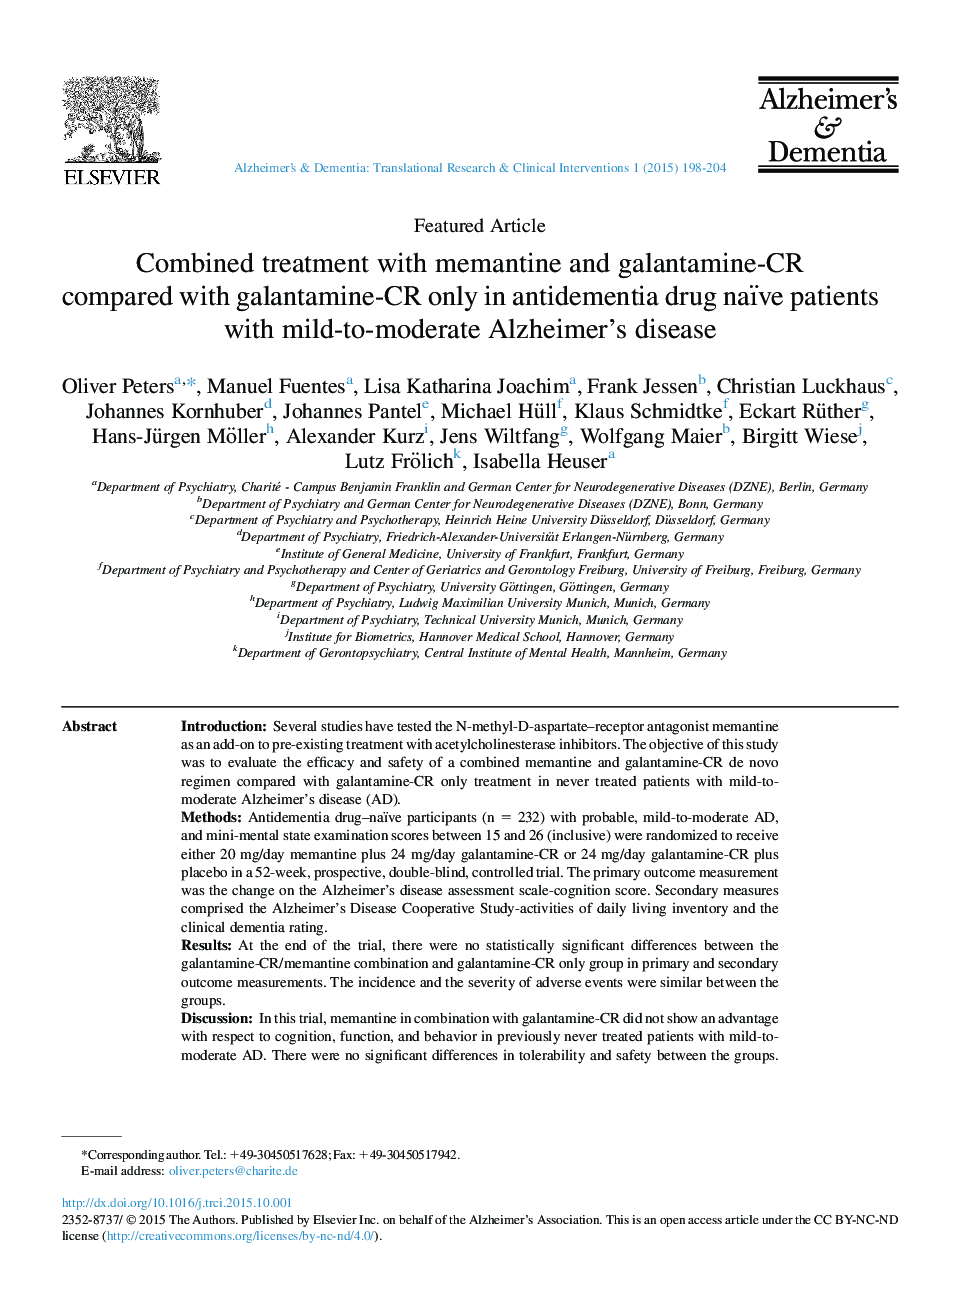 Combined treatment with memantine and galantamine-CR compared with galantamine-CR only in antidementia drug naïve patients with mild-to-moderate Alzheimer's disease